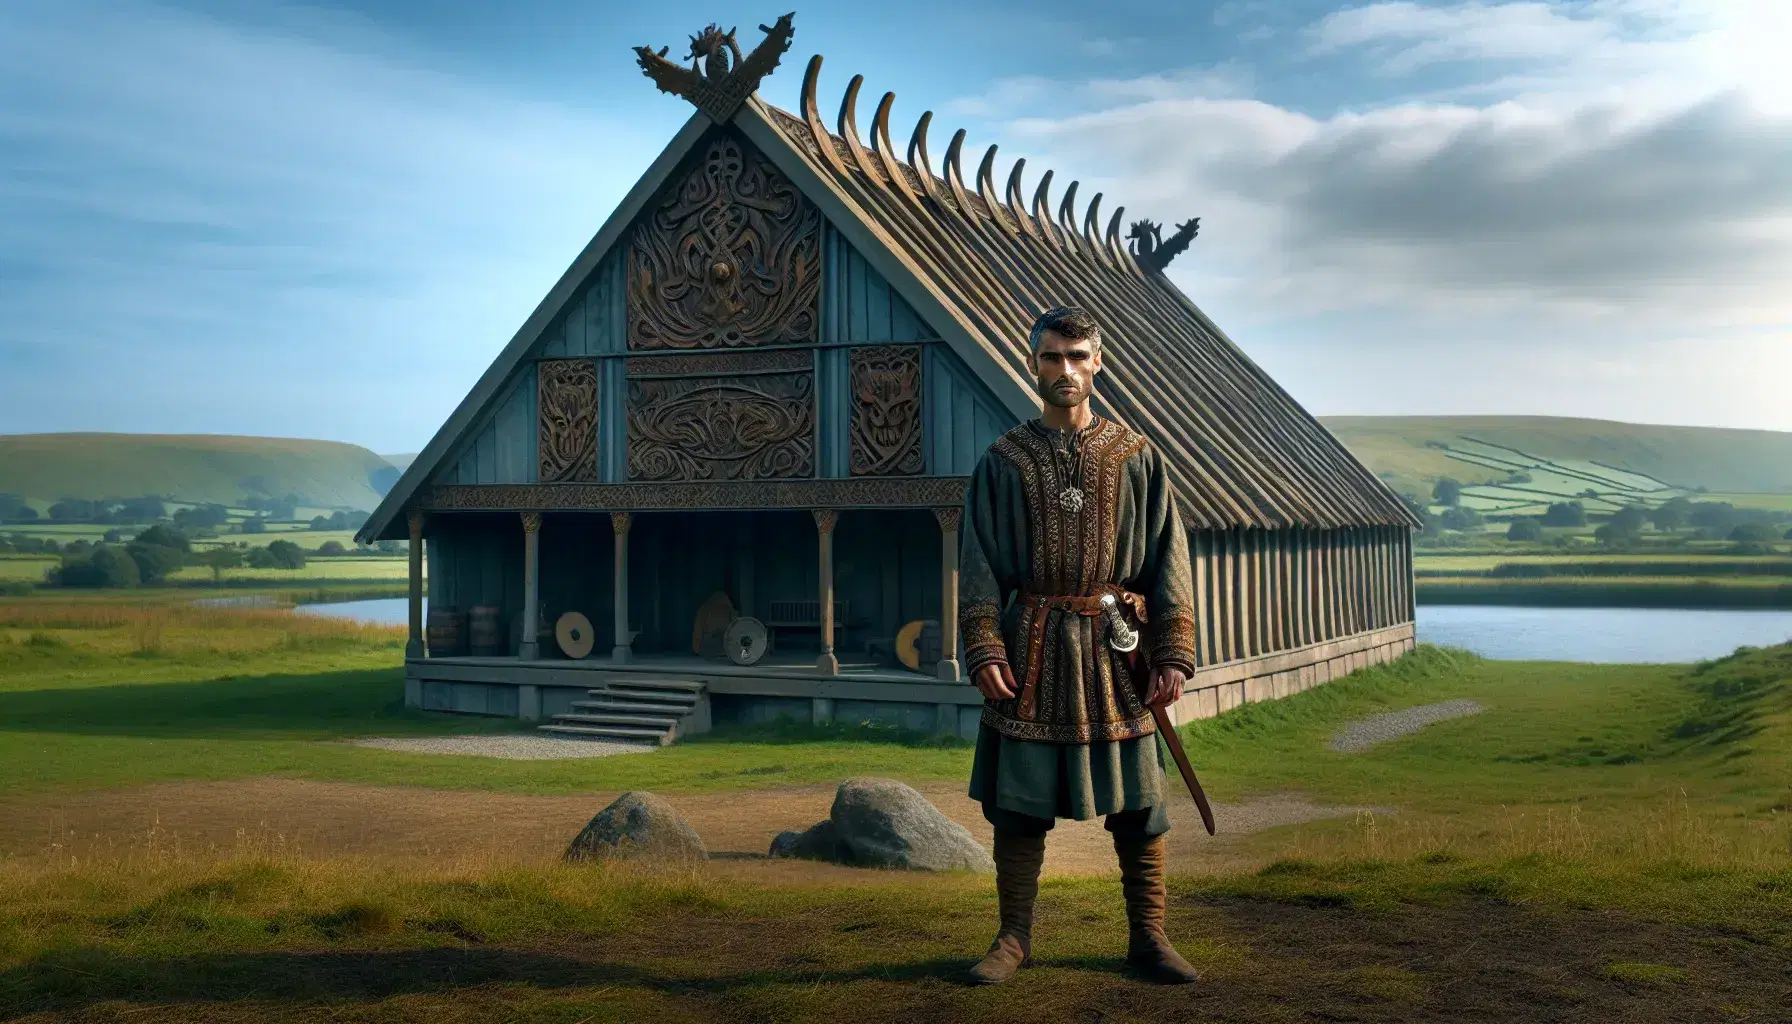 Viking longhouse with dragon head carvings under a blue sky, a Hispanic man in period attire with a sword, and a grazing horse nearby.